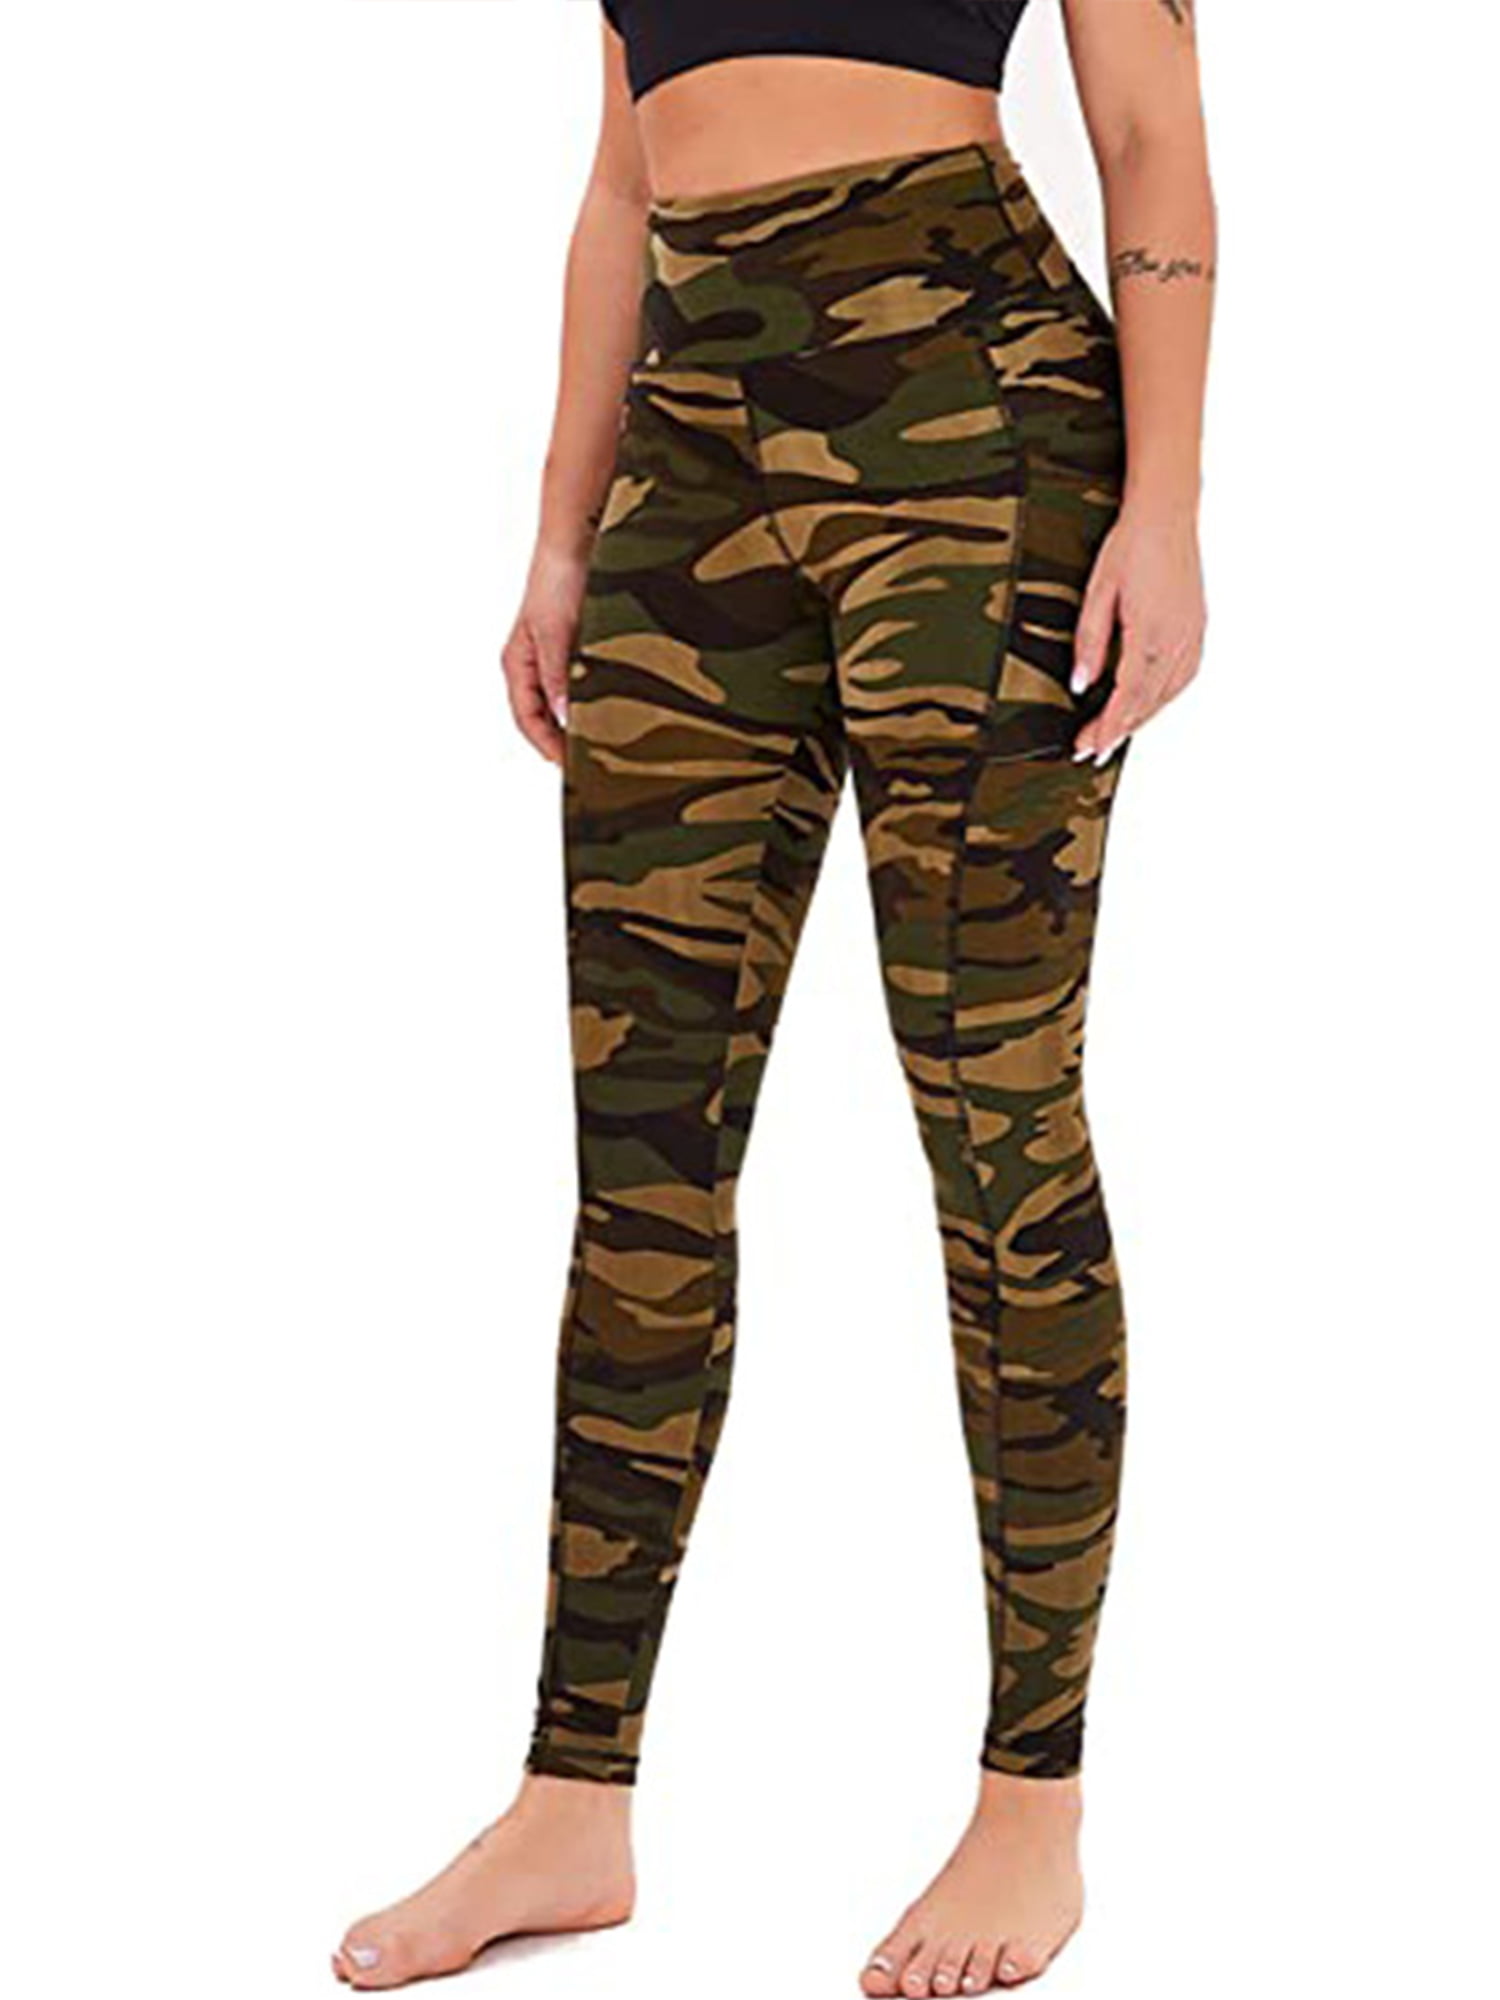 Womens Anti-Cellulite Sports Leggings Yoga Pants Fitness Gym Camouflage Trousers 